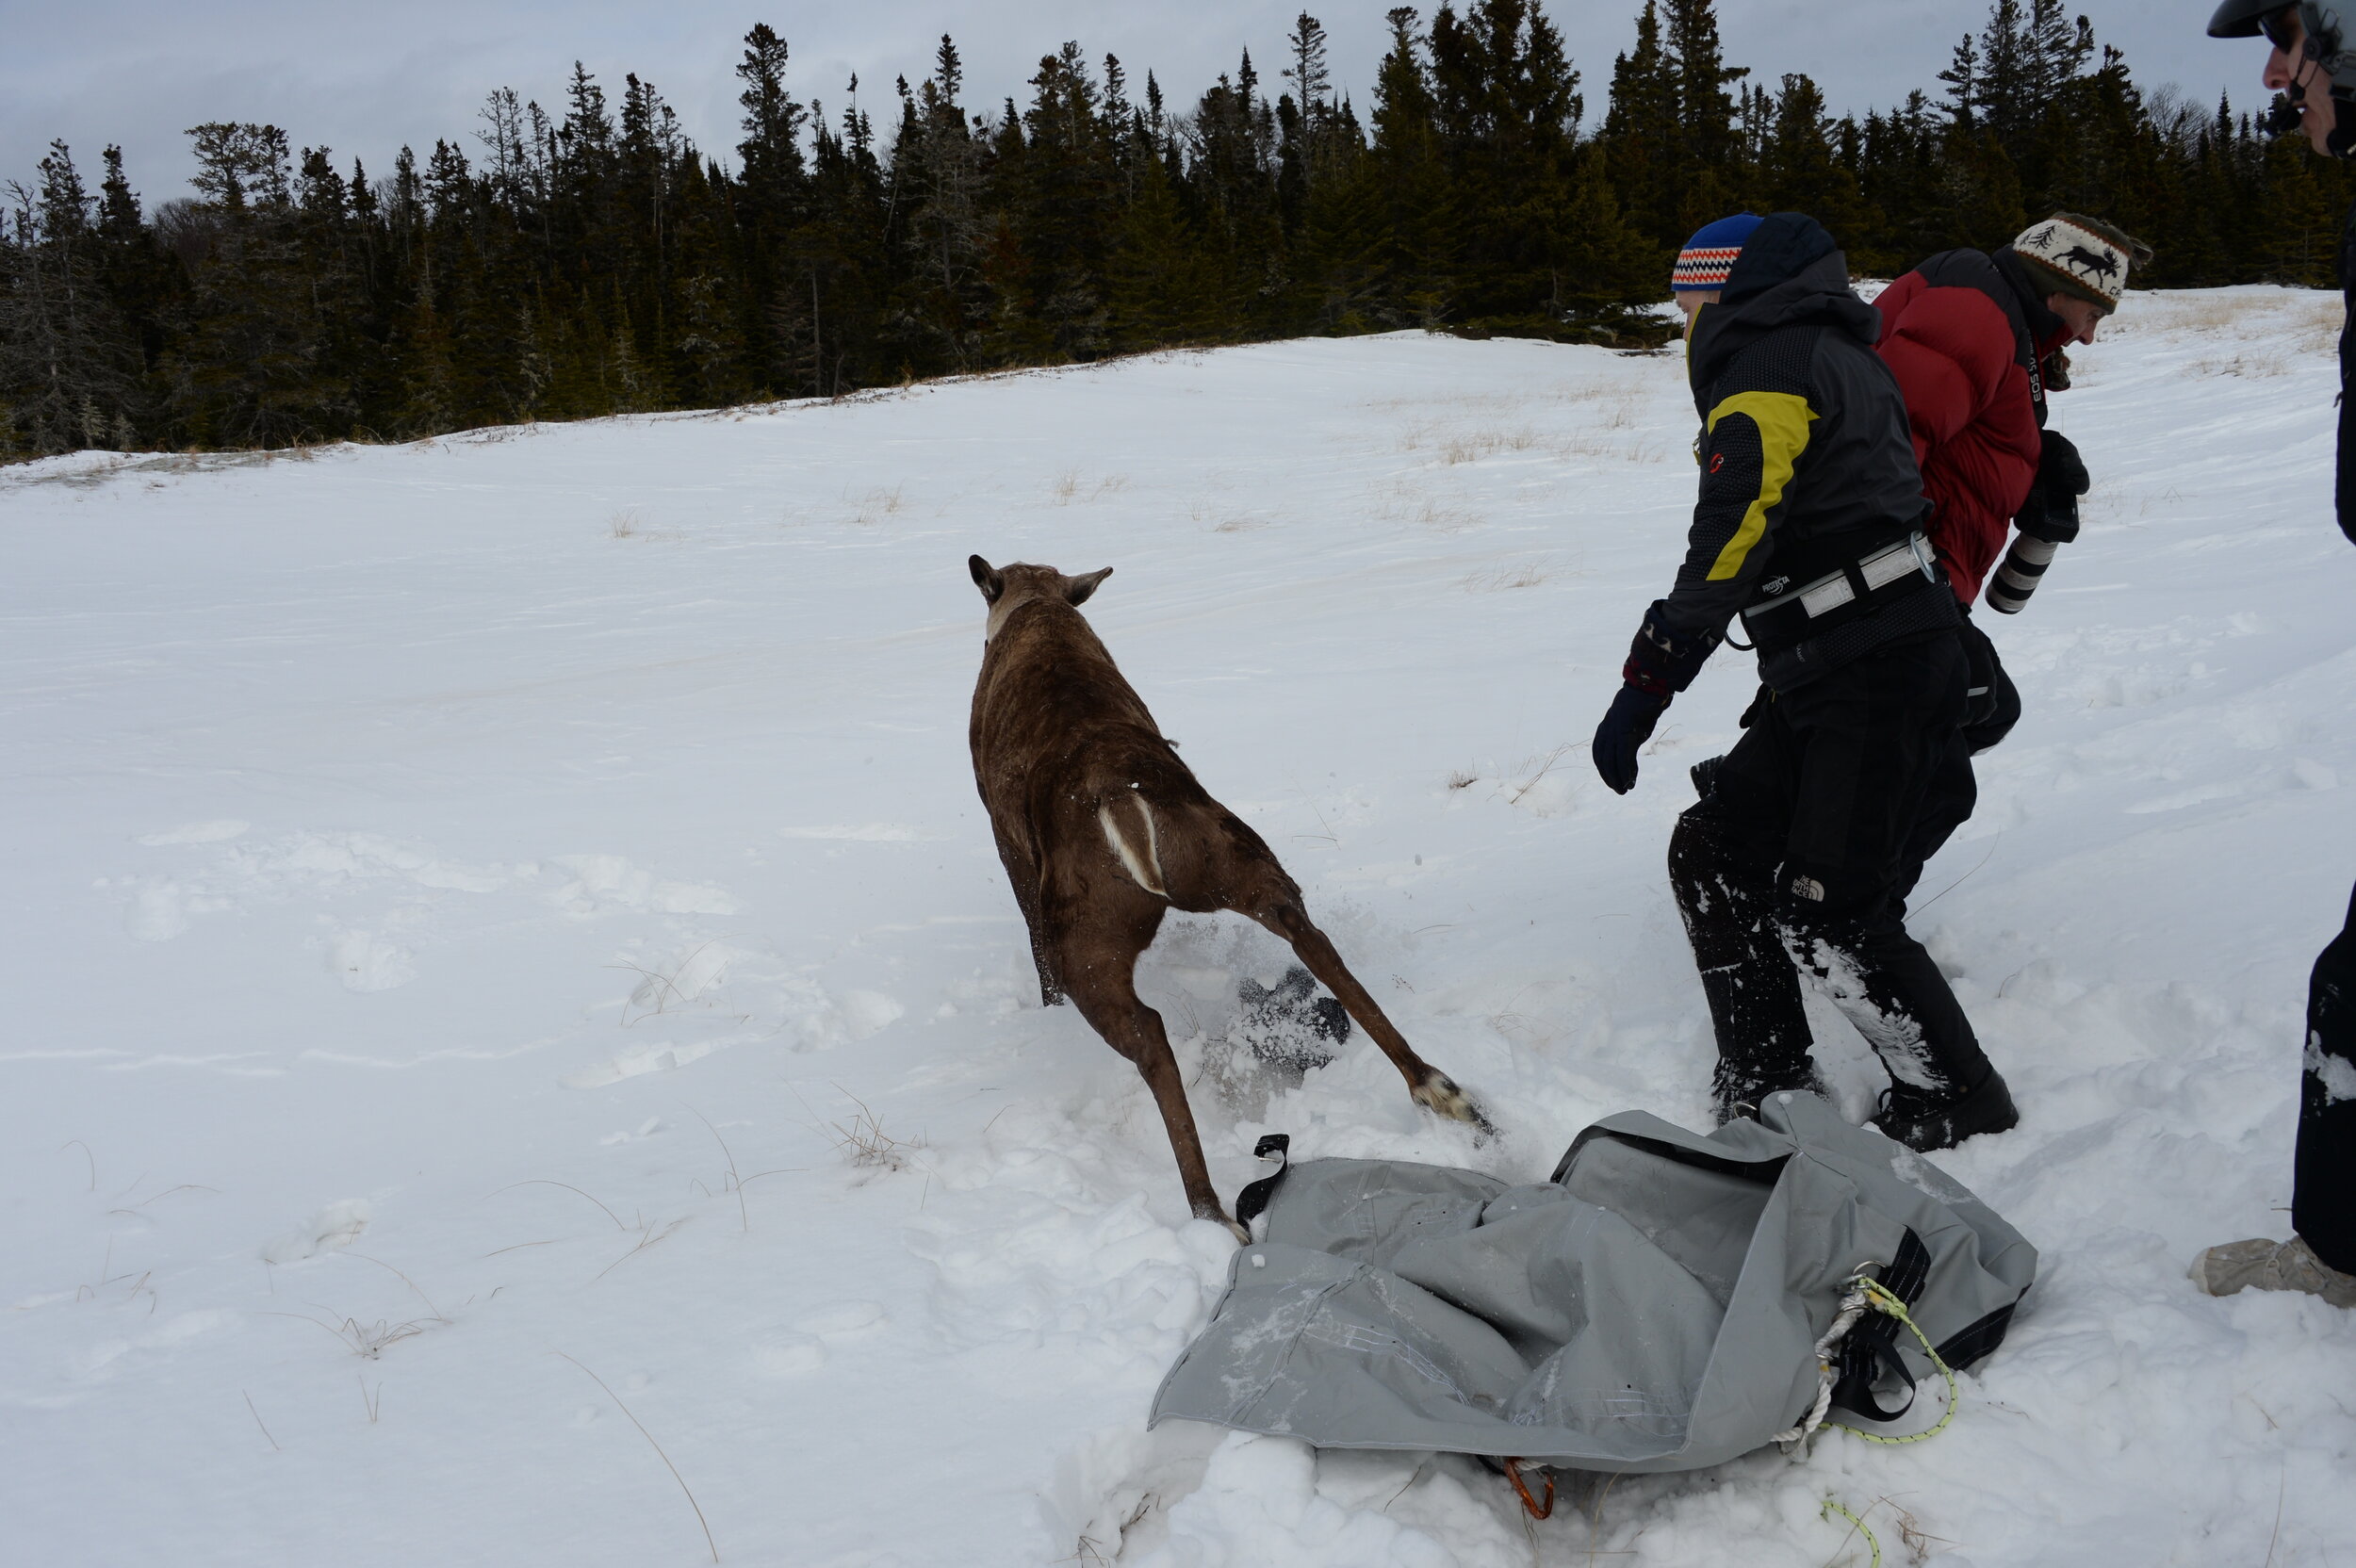 Lake Superior caribou: A caribou in the snow runs away from three men after being released